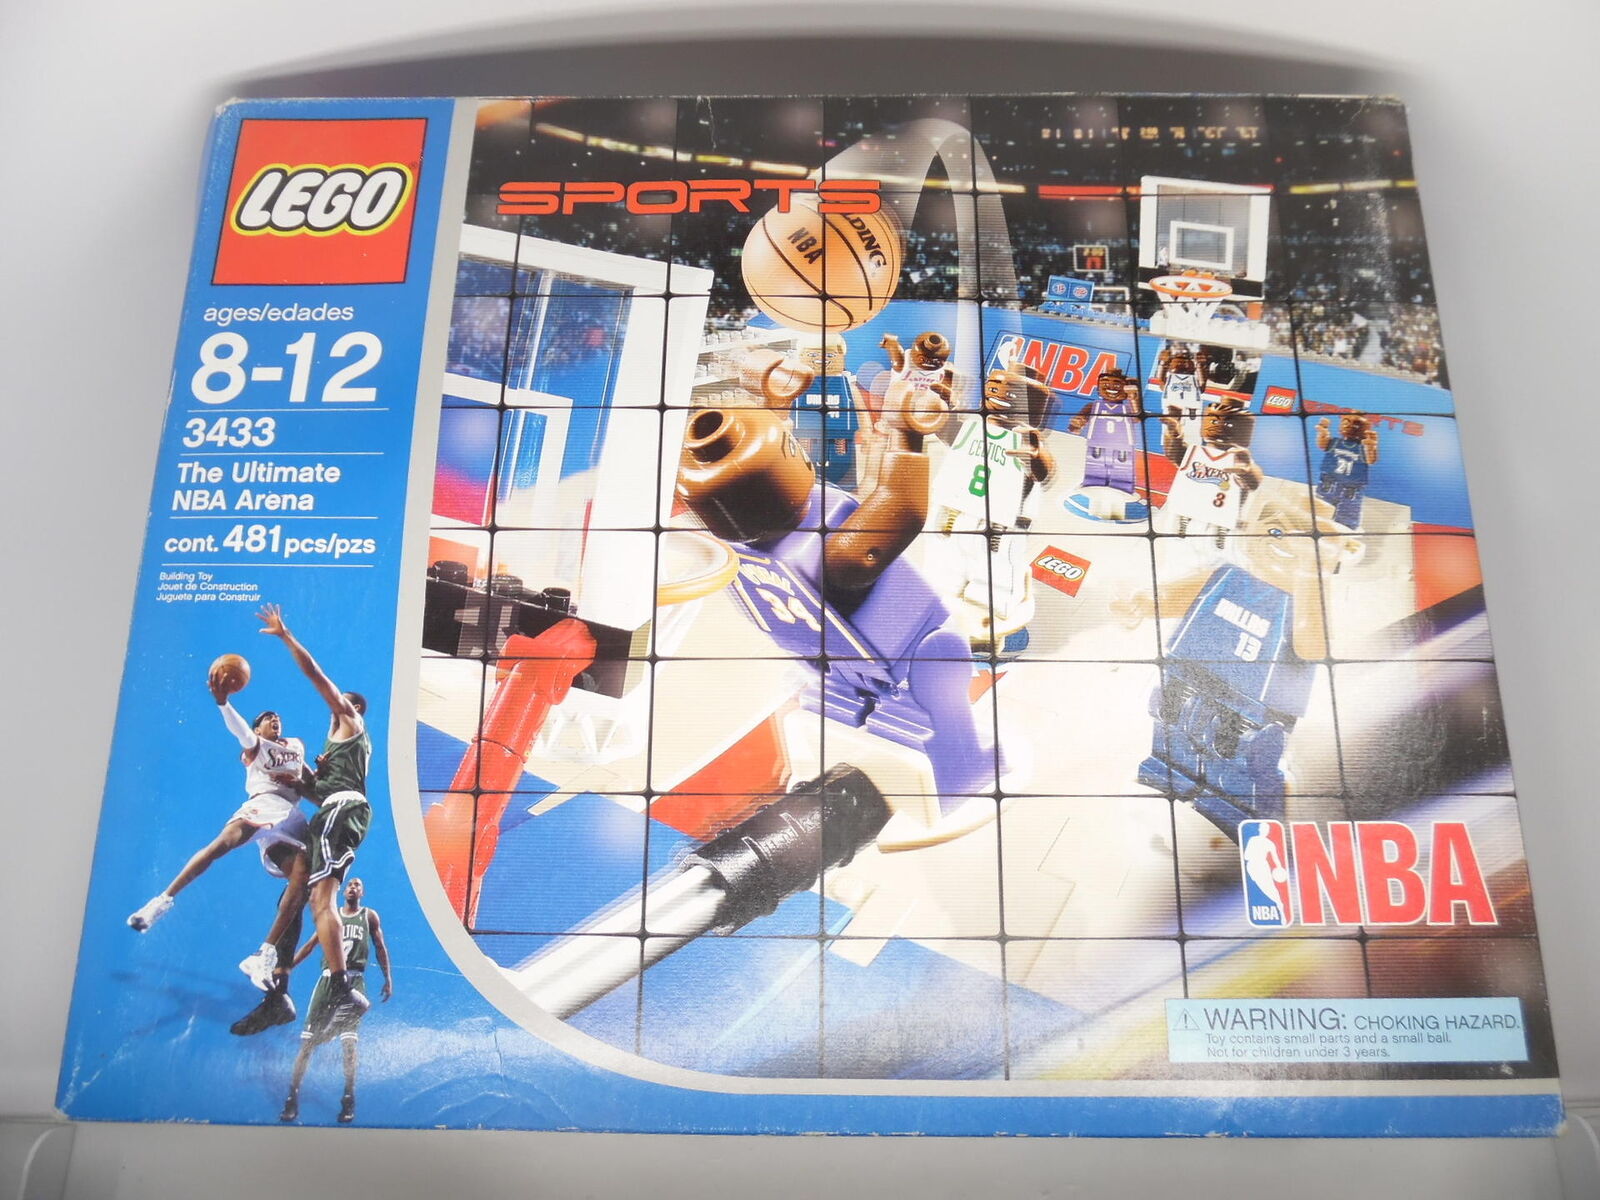 LEGO Sports The Ultimate NBA Arena Building Toy Brick Kit 3433, Age 8-12,  481pcs